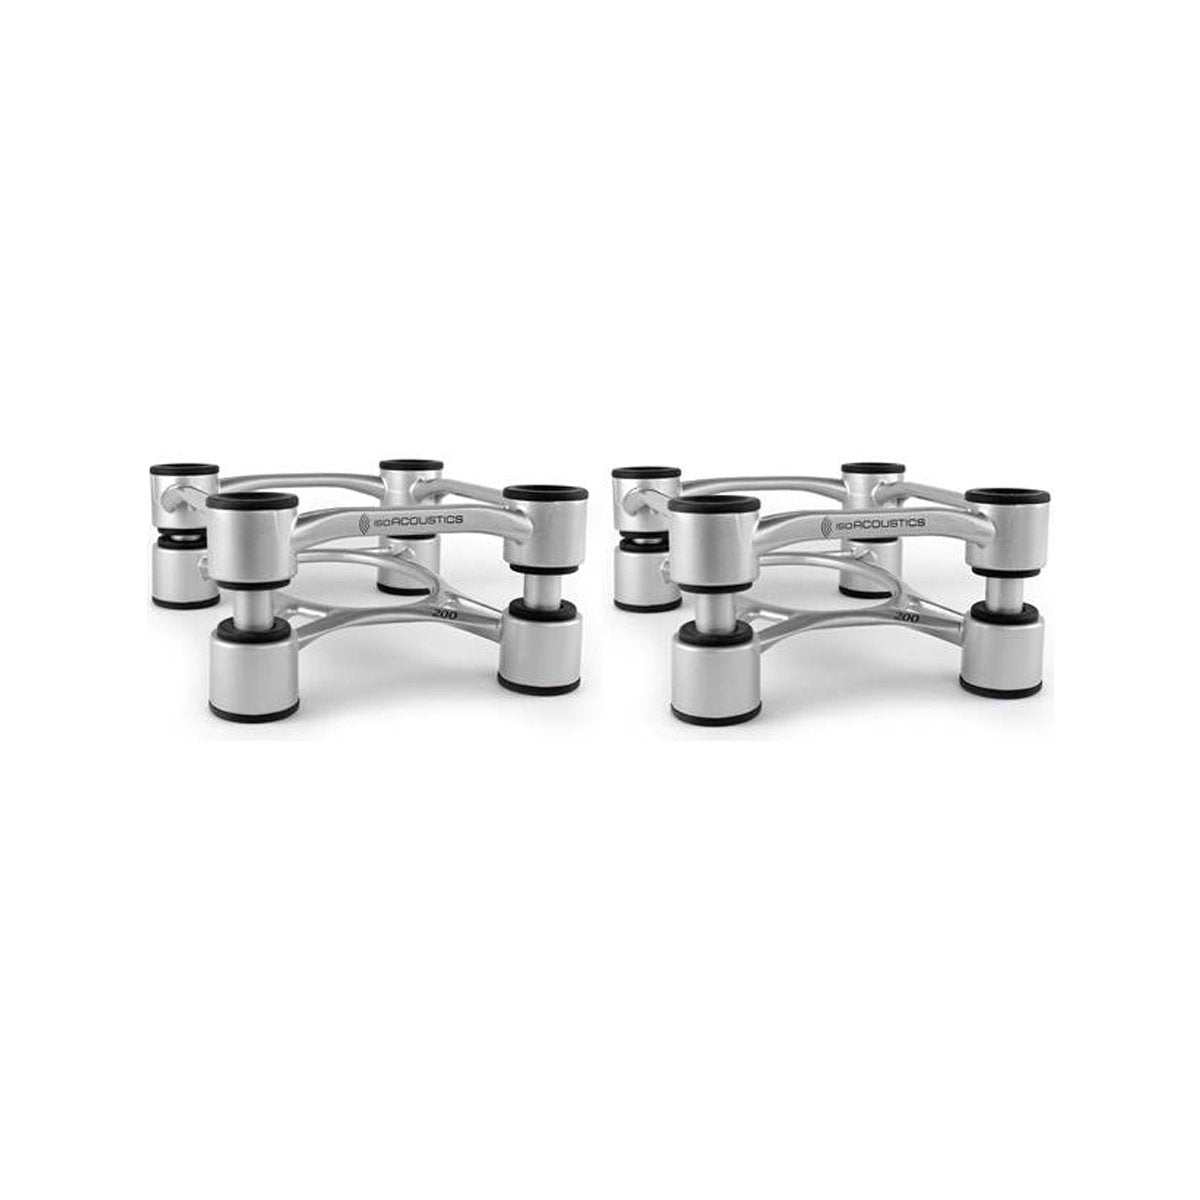 IsoAcoustics Aperta 100 Isolation Stands - The Audio Experts